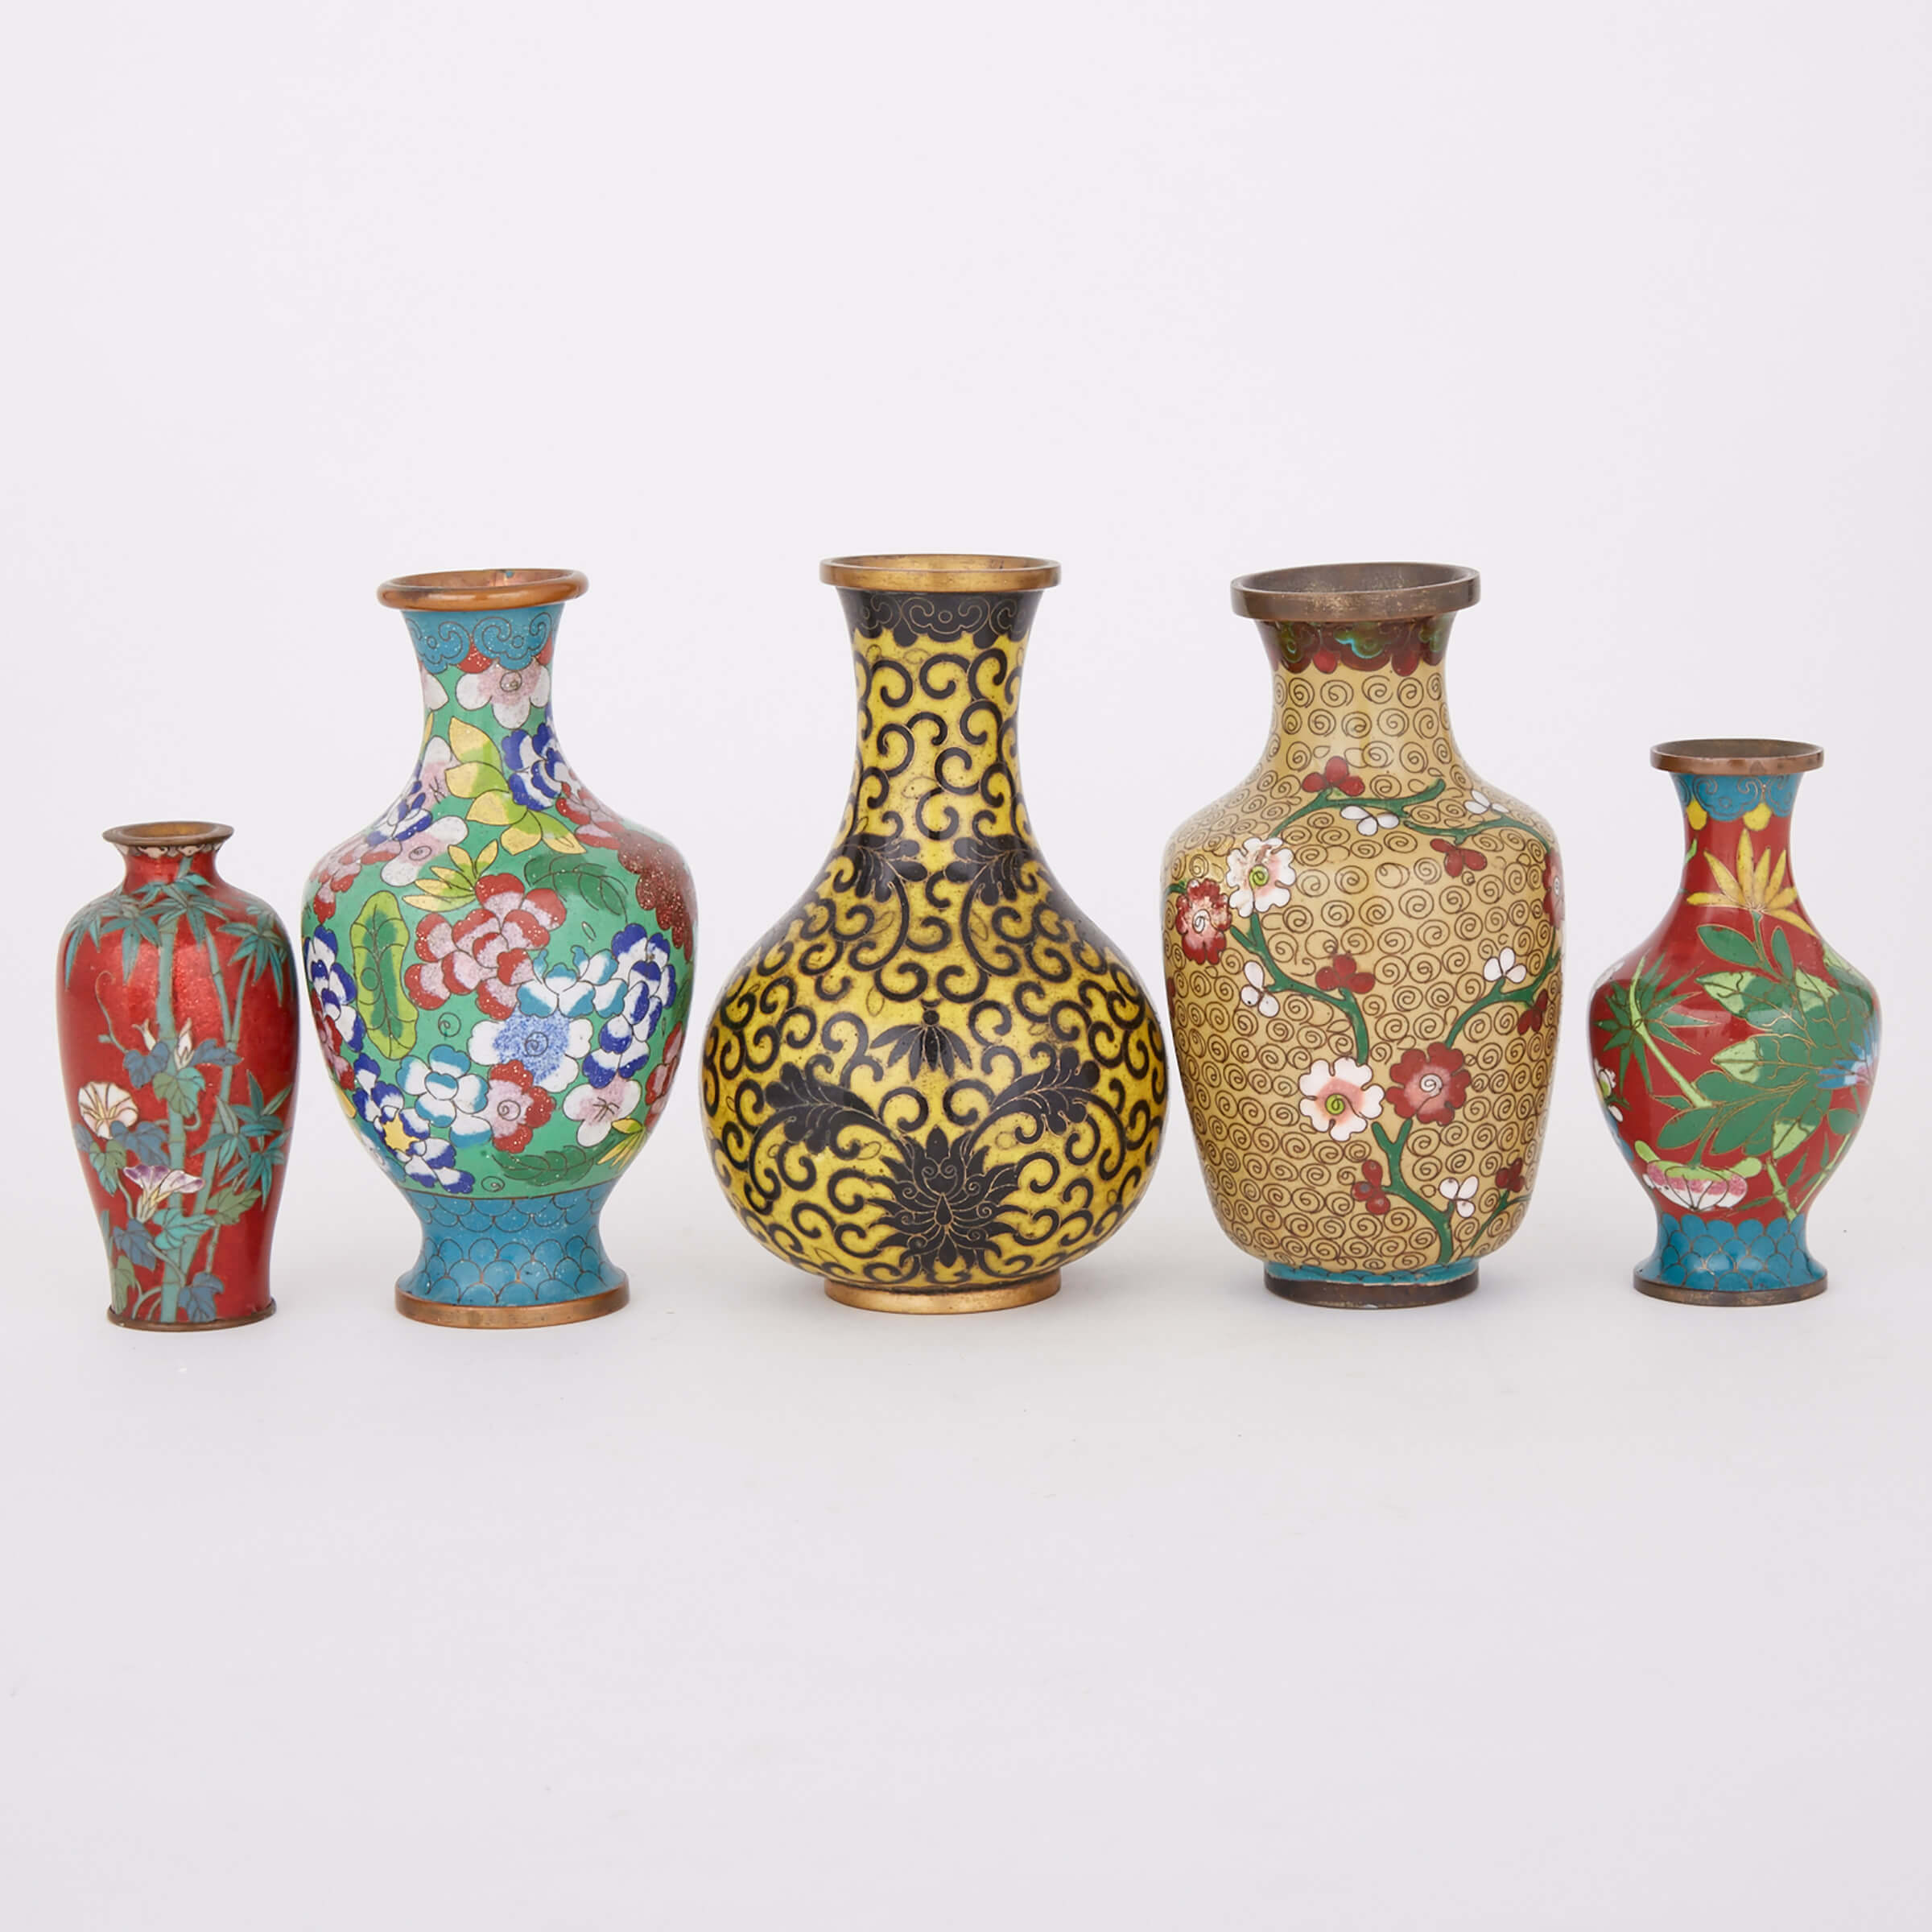 A Group of Five Cloisonné Vases, Early 20th Century